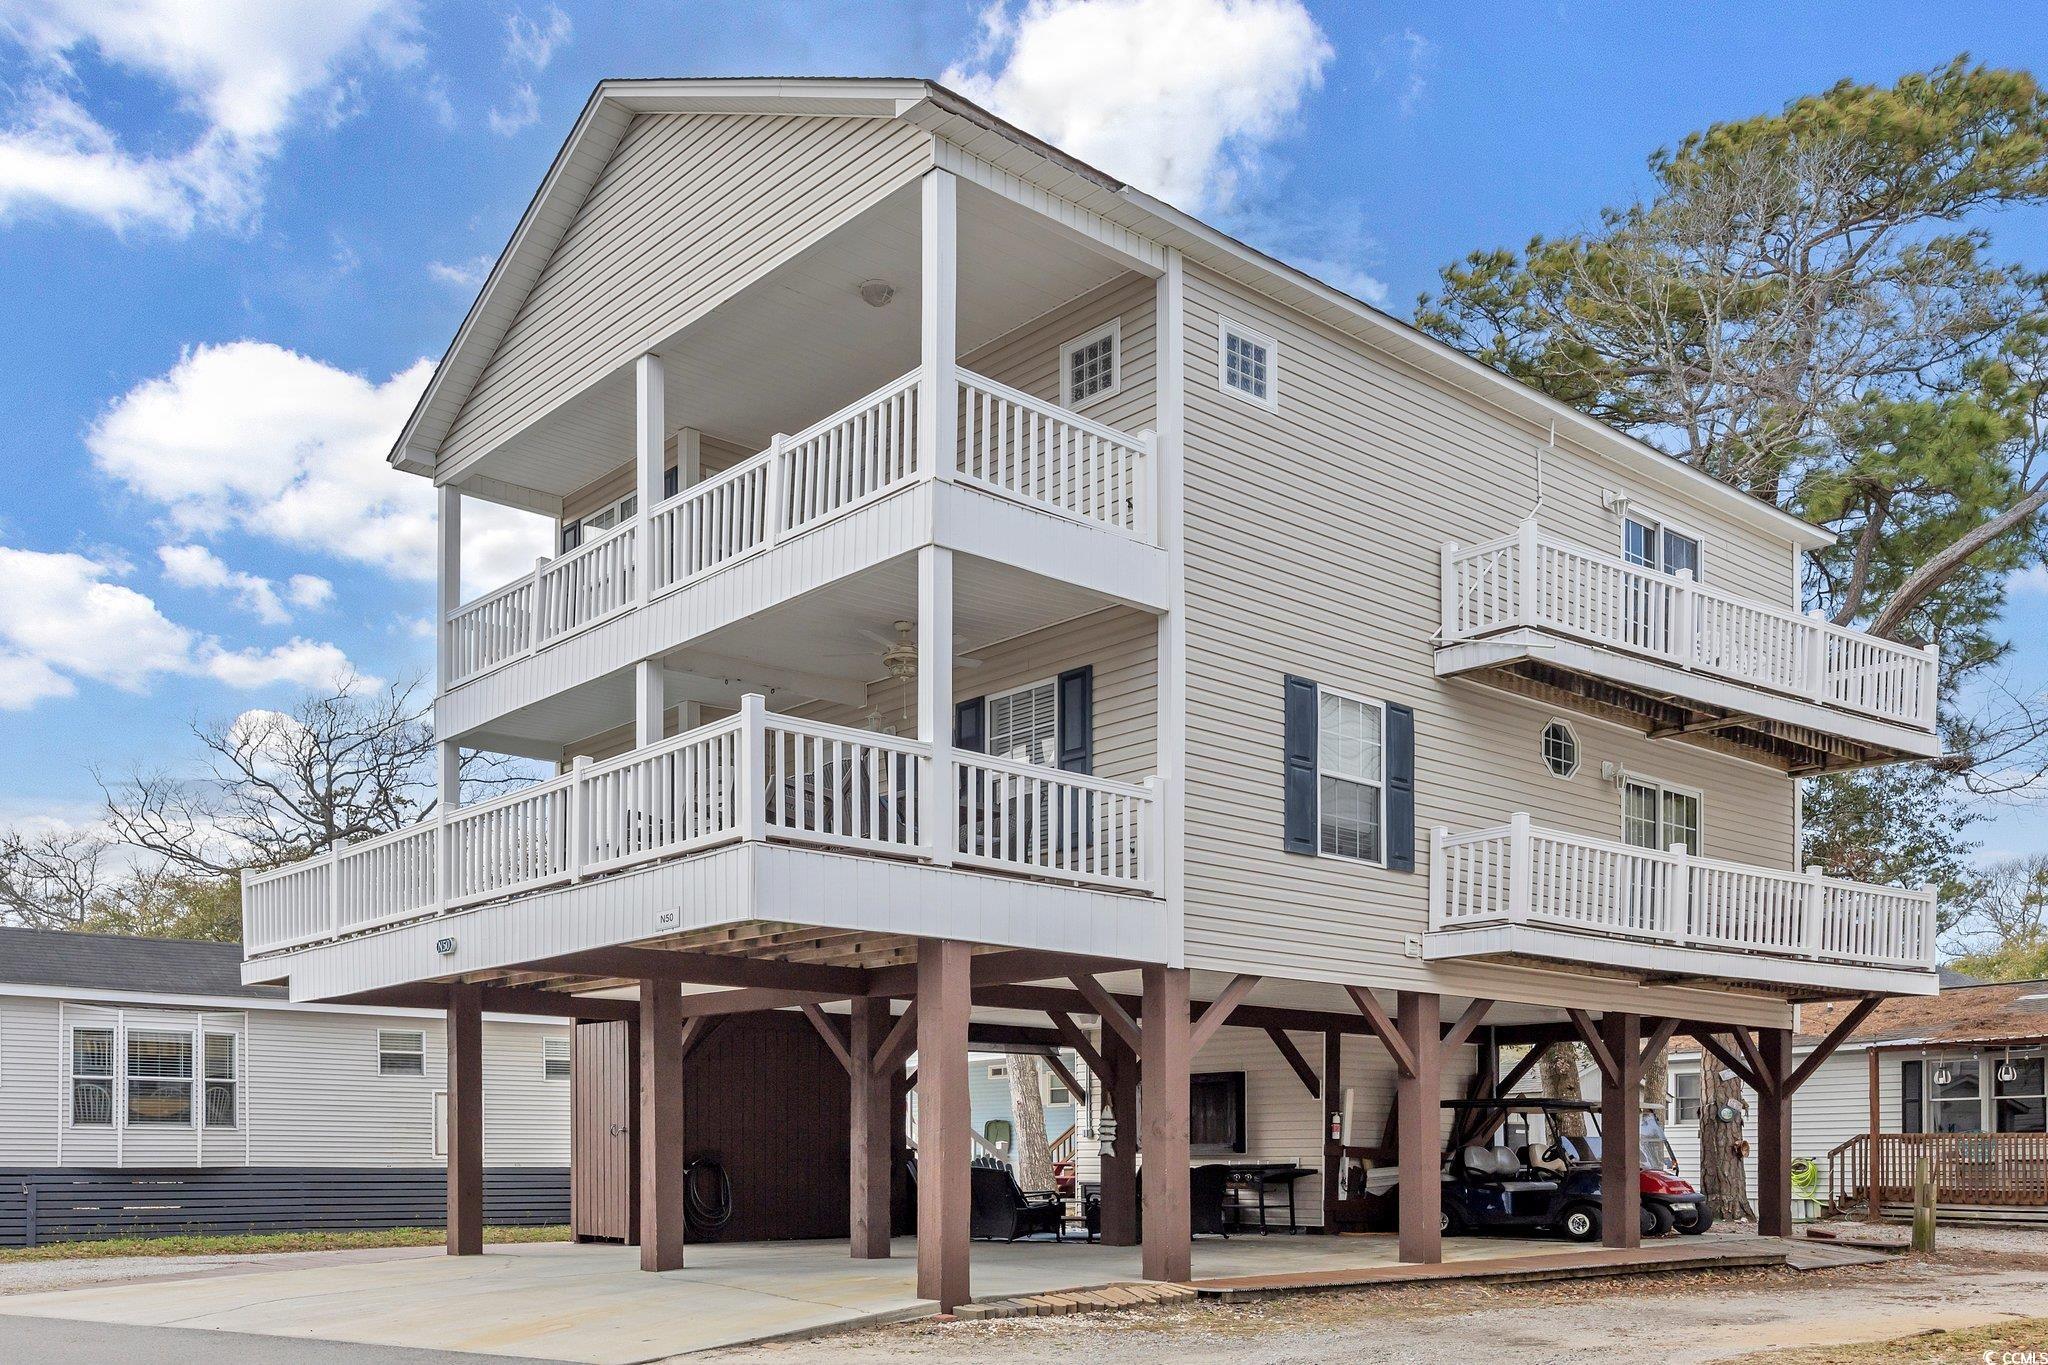 grab your swimsuit and come indulge in all that ocean lakes has to offer along the grand strand. all you need is your personal items with this furnished home. this open 4 bedroom, 3.5 bath home is ready to make memories for years to come. featuring large spacious bedrooms, with a master on each floor, you also have 4 decks around the house for sunning, hanging out and enjoying the shade and breeze year round. the home at n50 also features many recent upgrades like new furniture, upgraded lvp flooring throughout, new main decking and fresh paint inside. there is plenty of parking underneath the home for you and your guest, a recently added entertainment area with seating and tv and also a storage garage for your beach toys and extras. located centrally in ocean lakes, you can access the store, snack shack and even the arcade and water park all within walking distance if you choose. did we mention lazy river, water slides, indoor pool, putt-putt, and recreation center with daily activities? the ocean is a straight shot from either end of the street. hop on the golf cart or your bicycle to go explore and take in the beauty of ocean lakes and enjoy activities and events around the year. this home would be great to live in full time, or even used as a second home and rental property. the openness of the main floor makes for great game nights and socializing with your friends and family. the fully stocked kitchen is ready for all occasions and hosting meals for many. there is no hoa in ocean lakes, but there is a yearly lot lease paid half in january and half in july. ocean lakes offers 24 hour security, gated entry, a mile of beach front, activities year round for all ages and amenities for everyone. come see for yourself all that ocean lakes has to offer and compliment this well designed home. schedule your showing today!